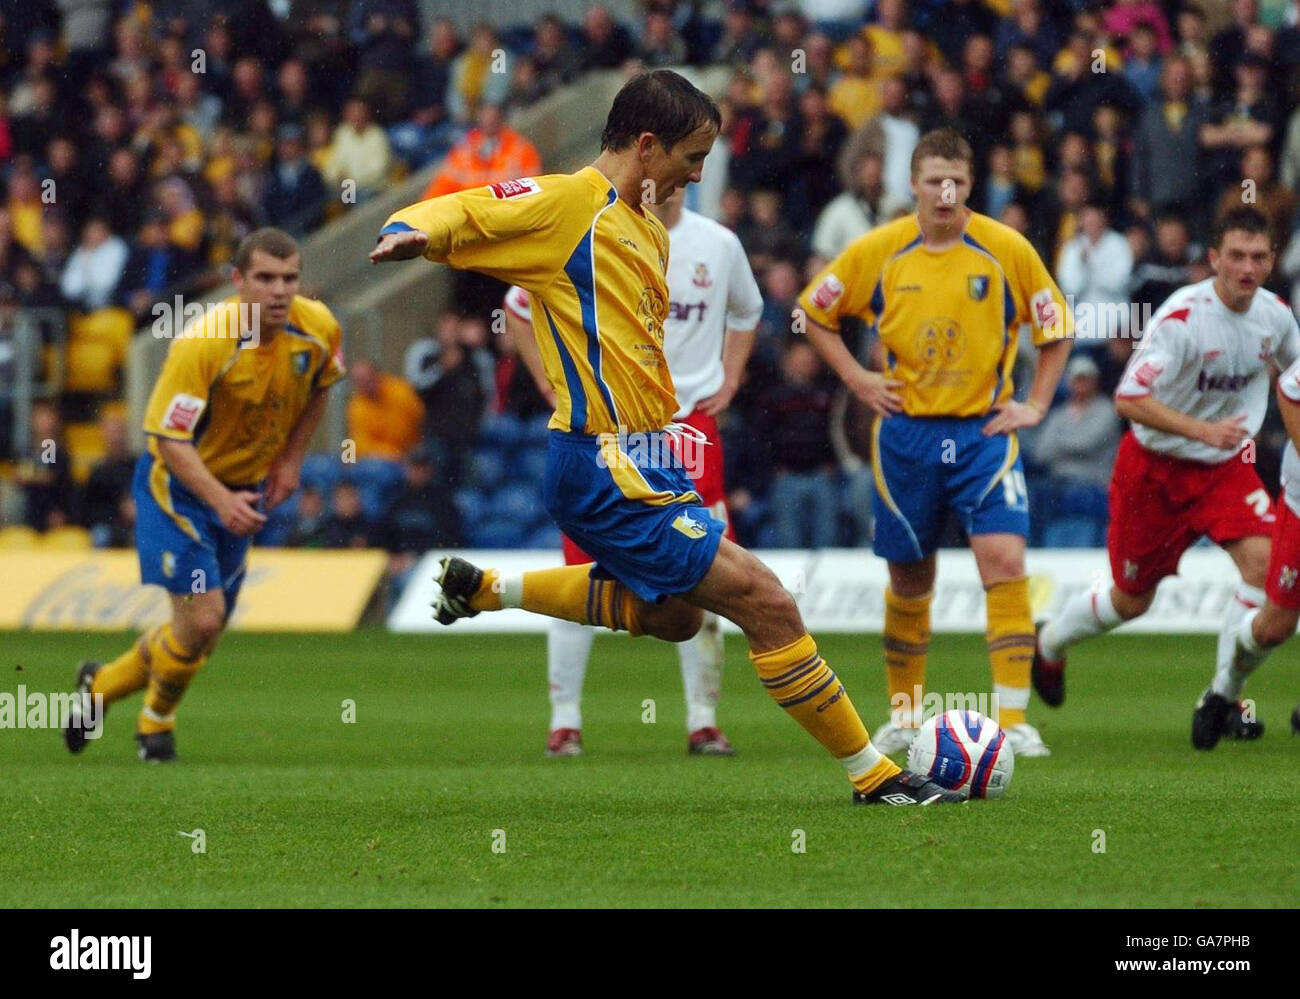 Mansfield Town's Michael Boulding scores from the penalty spot during the Coca-Cola Football League Two match at Field Mill, Mansfield. Stock Photo